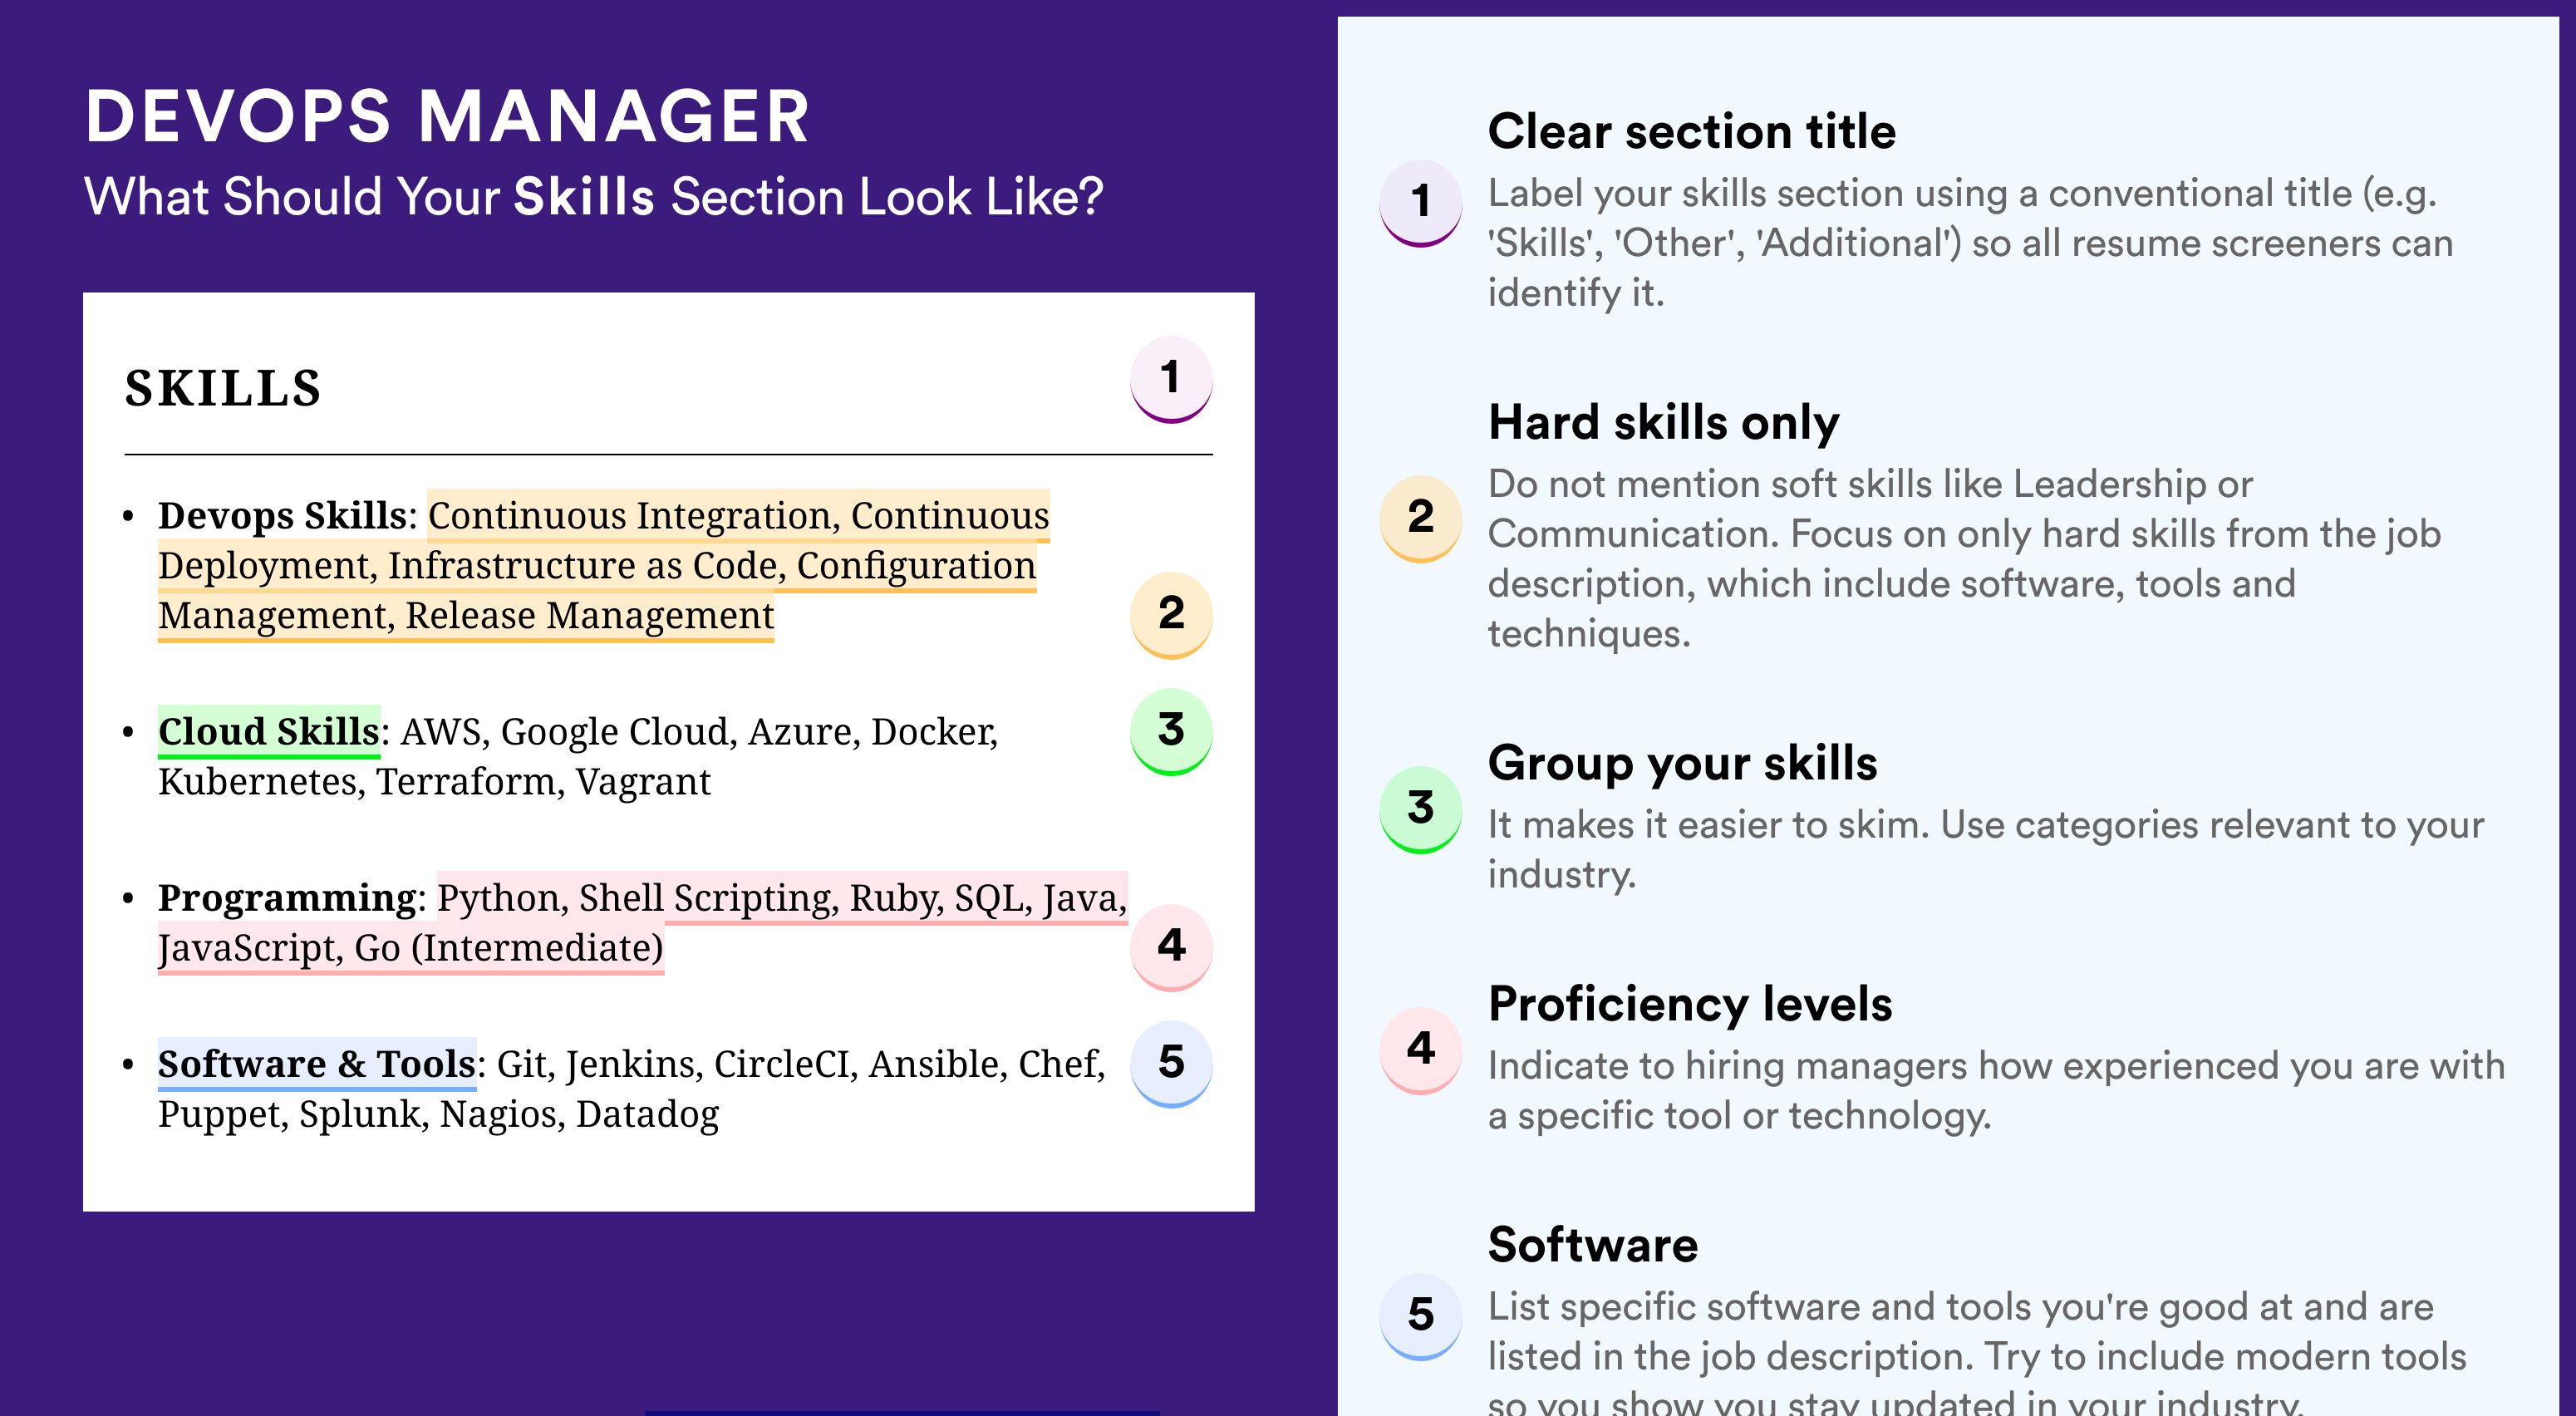 How To Write Your Skills Section - DevOps Manager Roles